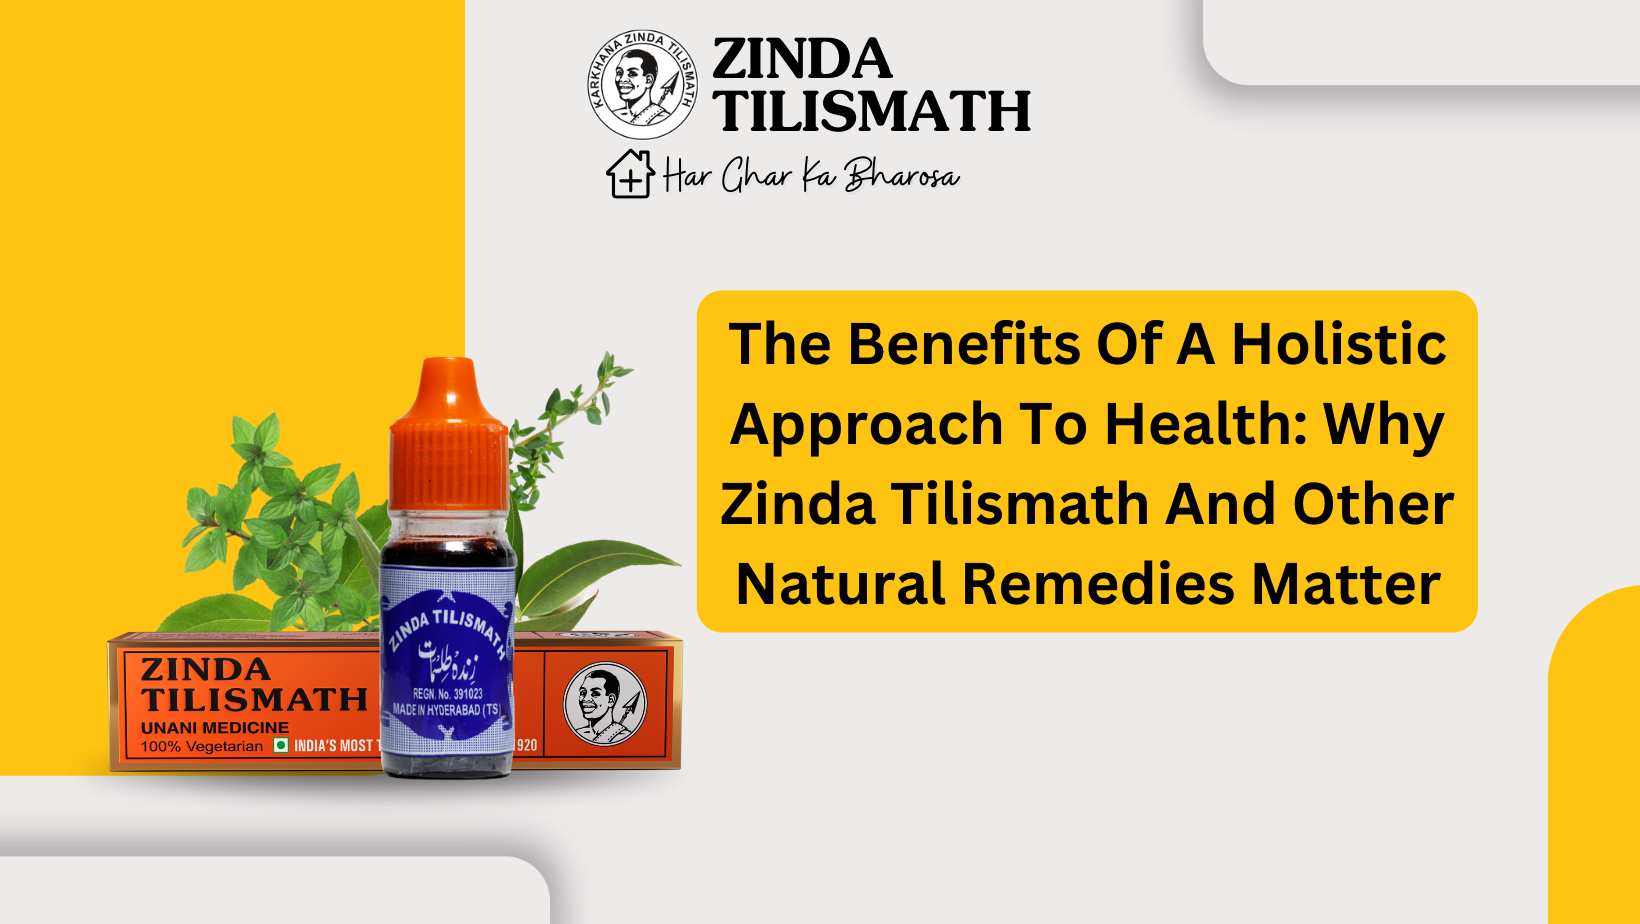 The Benefits Of A Holistic Approach To Health: Why Zinda Tilismath And Other Natural Remedies Matter